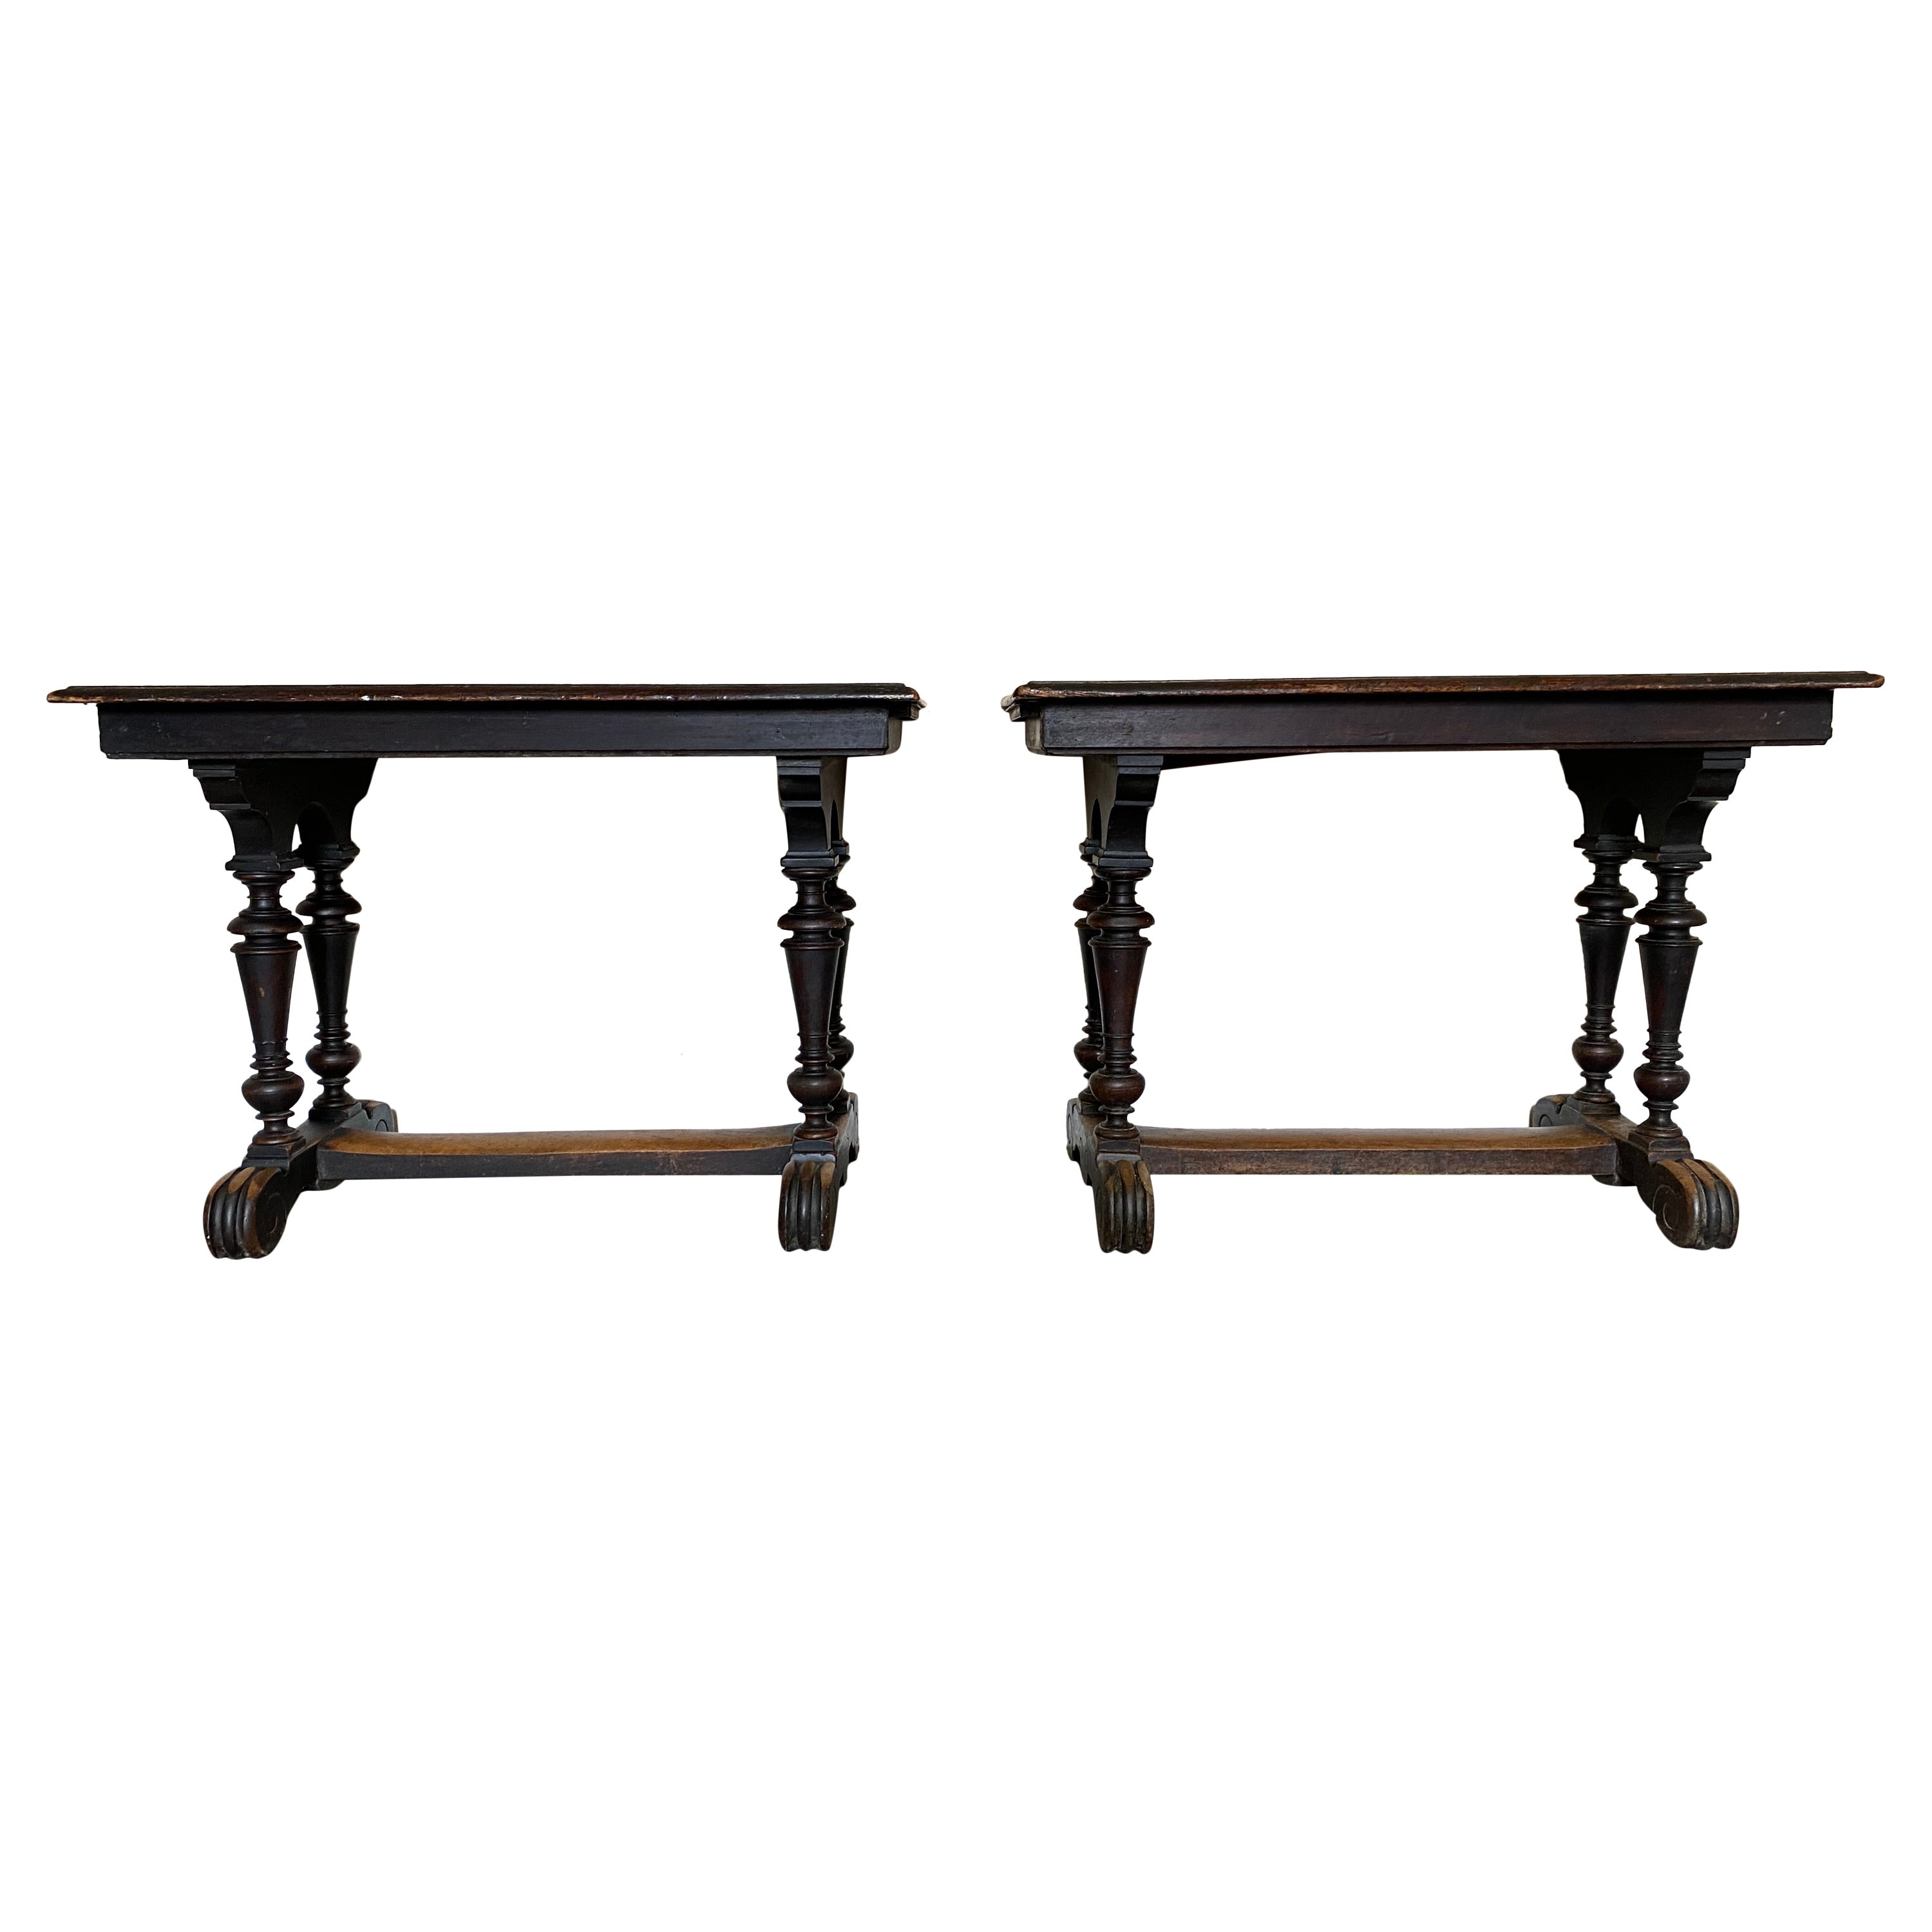 Pair of Flemish Estaminet Table - Late 18th - France Or Belgium For Sale